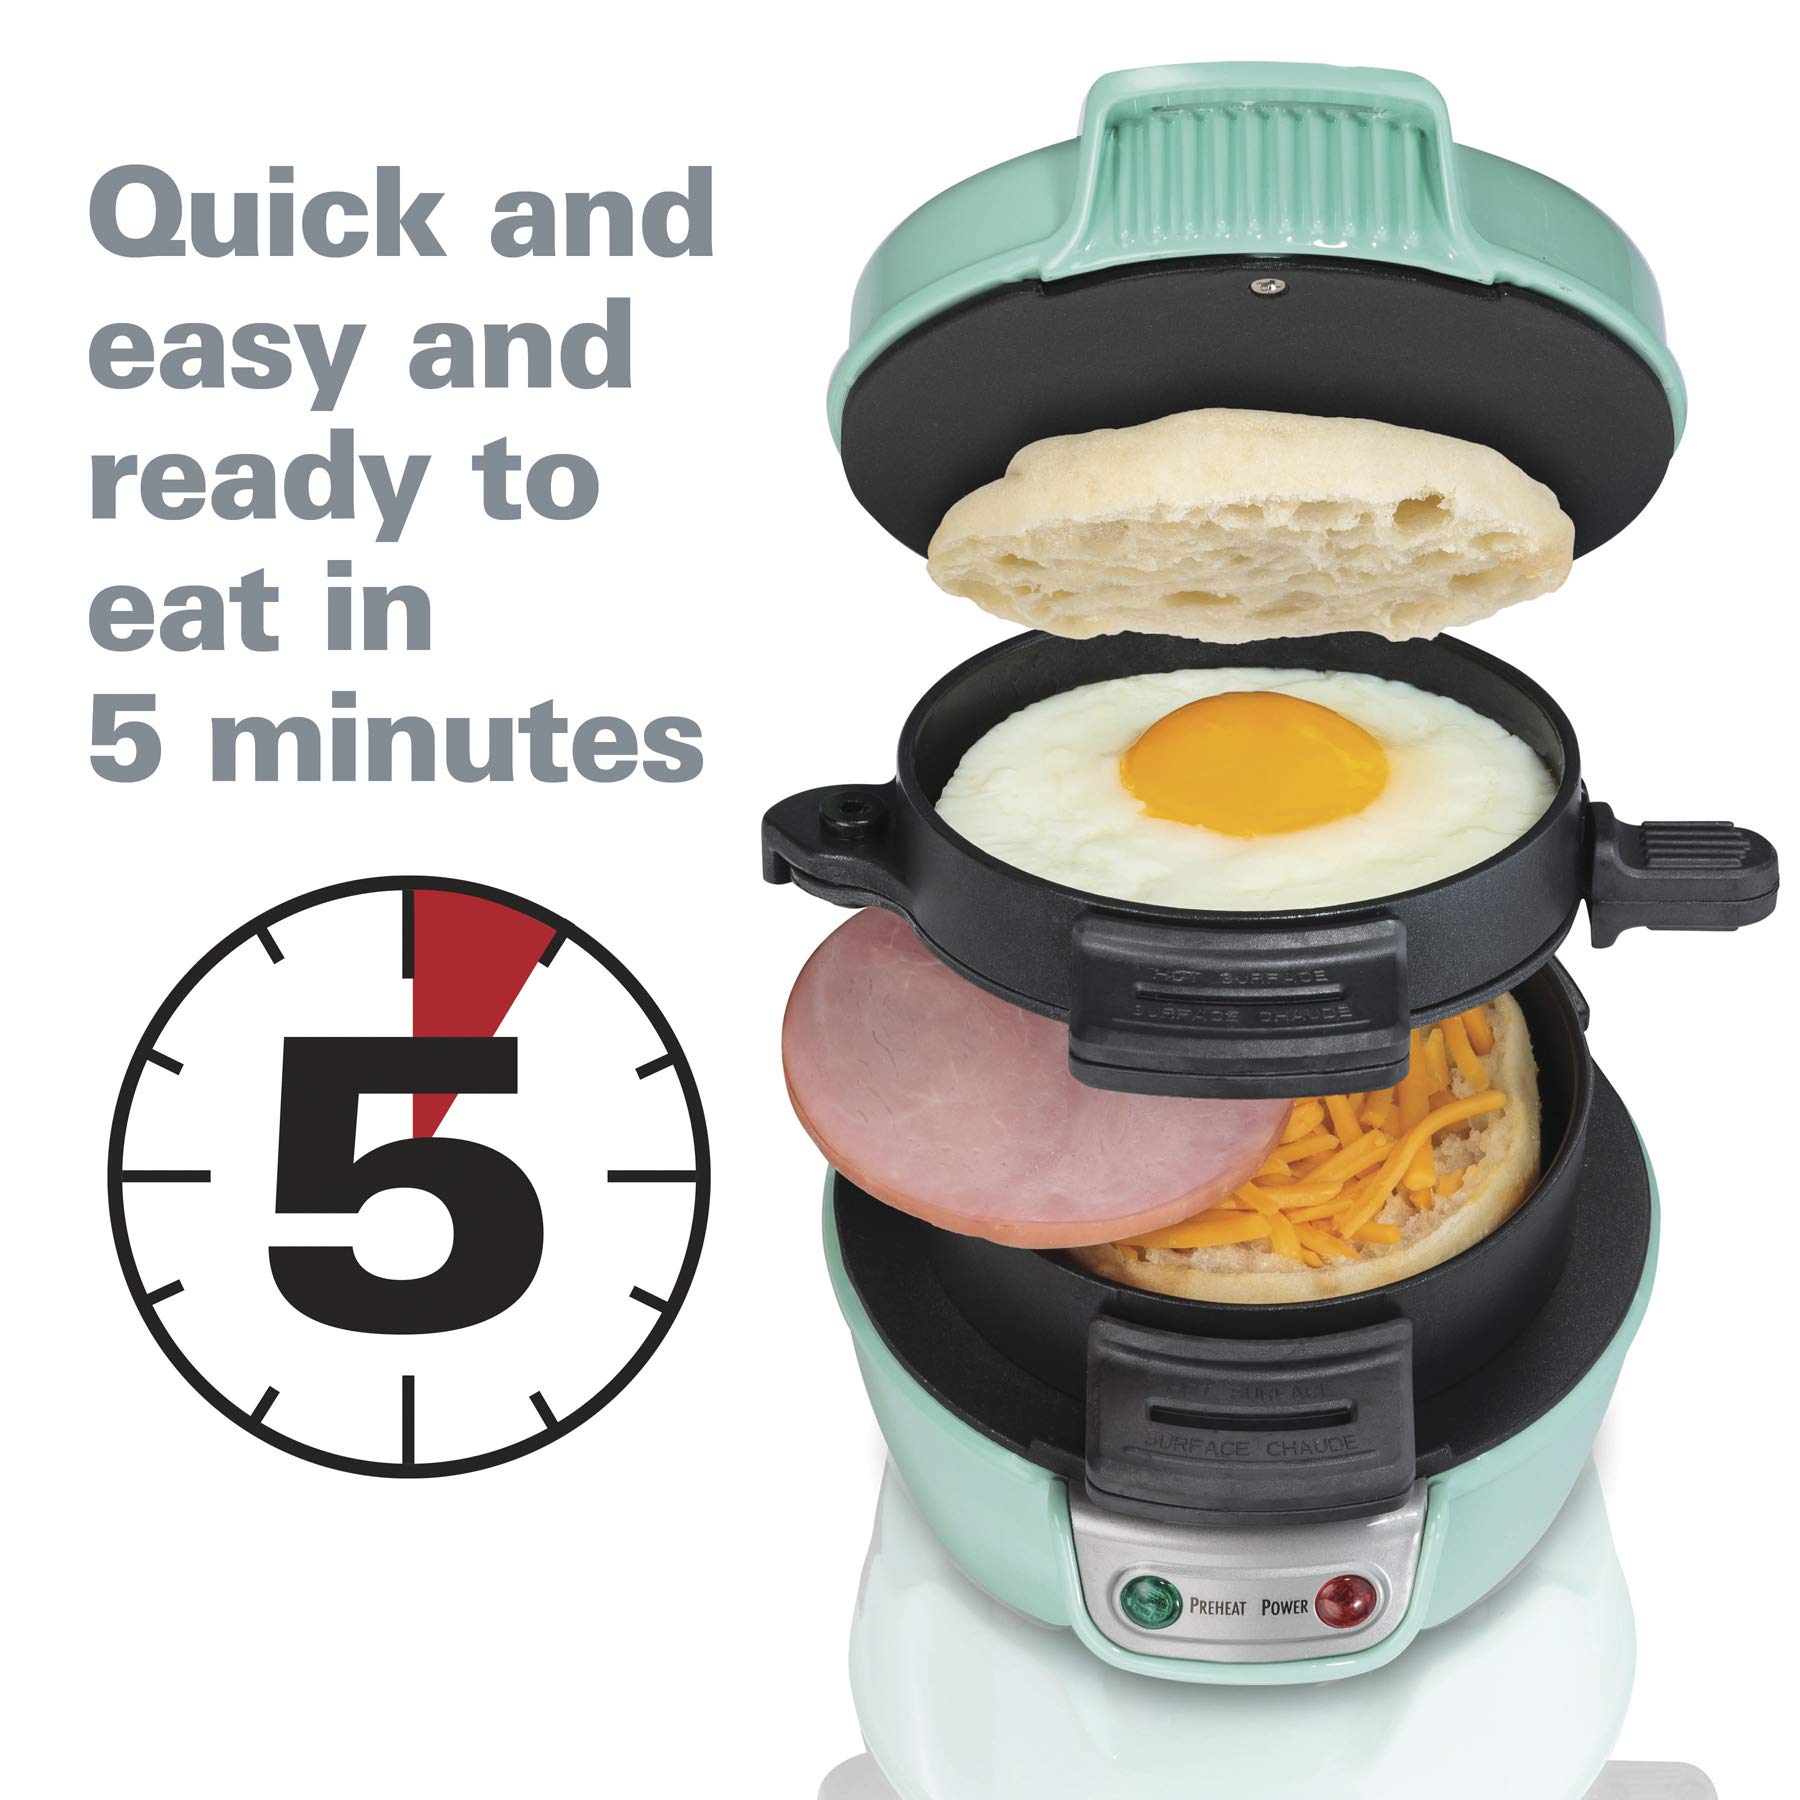 Hamilton Beach Breakfast Sandwich Maker with Egg Cooker Ring, Customize Ingredients, Perfect for English Muffins, Croissants, Mini Waffles, Dorm Room Essentials, Mint (25482)